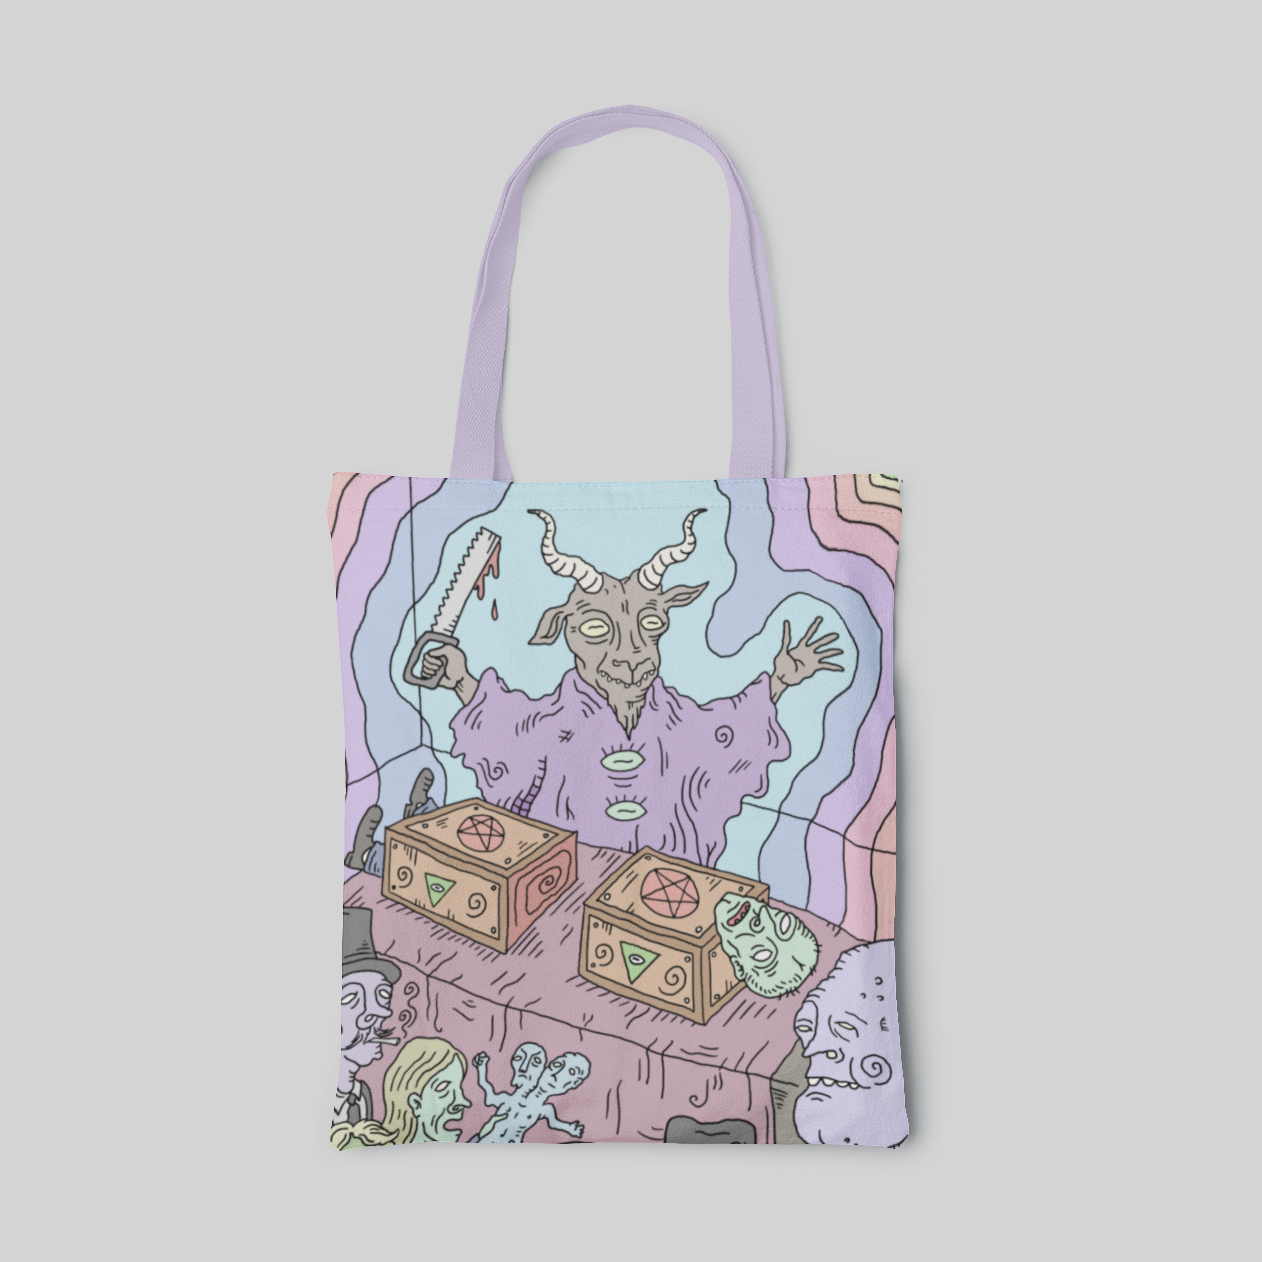 Pastel themed tote bag with magic ox and rainbow border